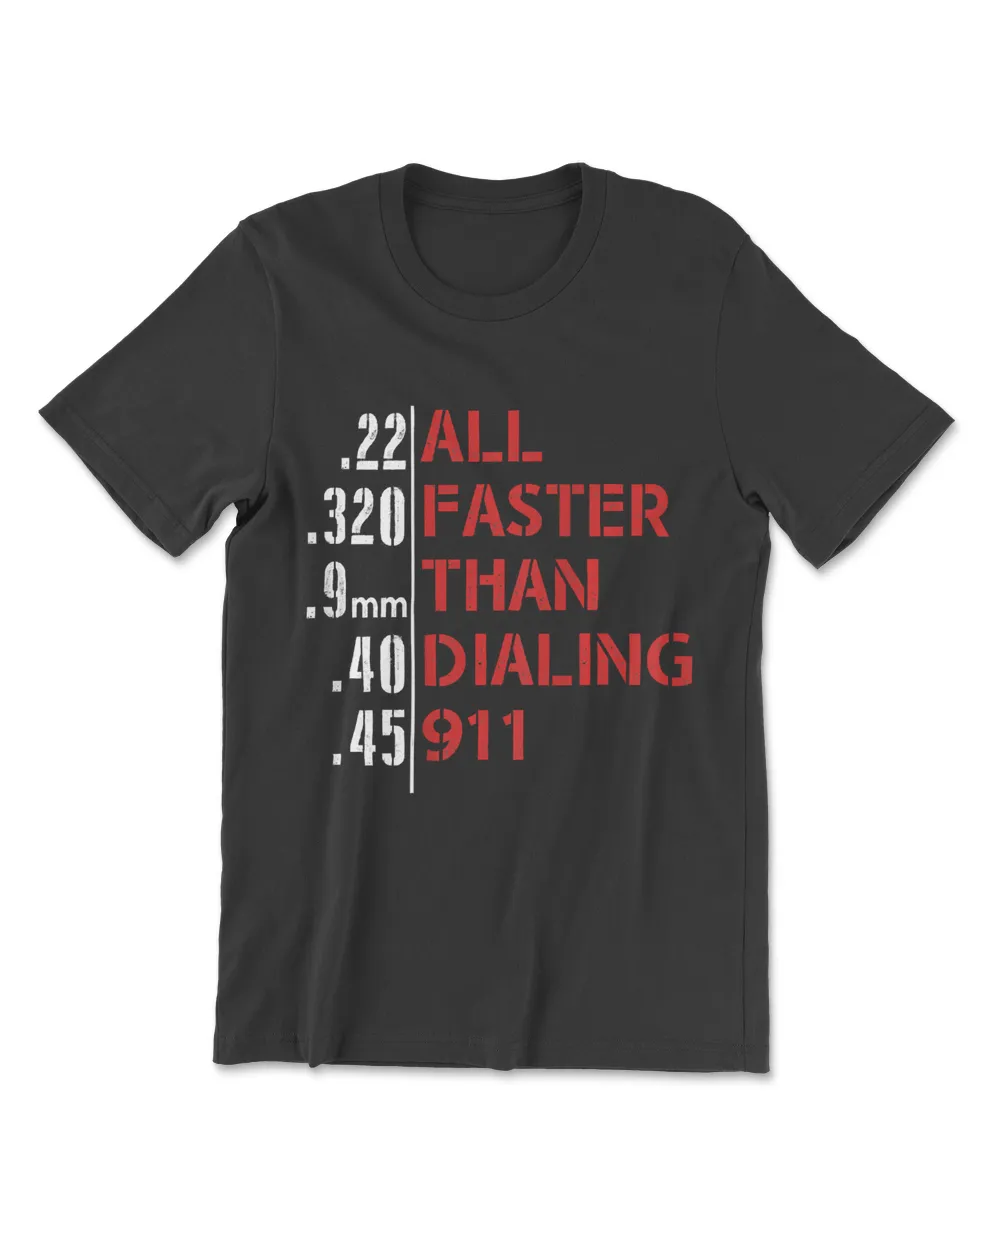 All Faster Than Dialing 911 (on Back)